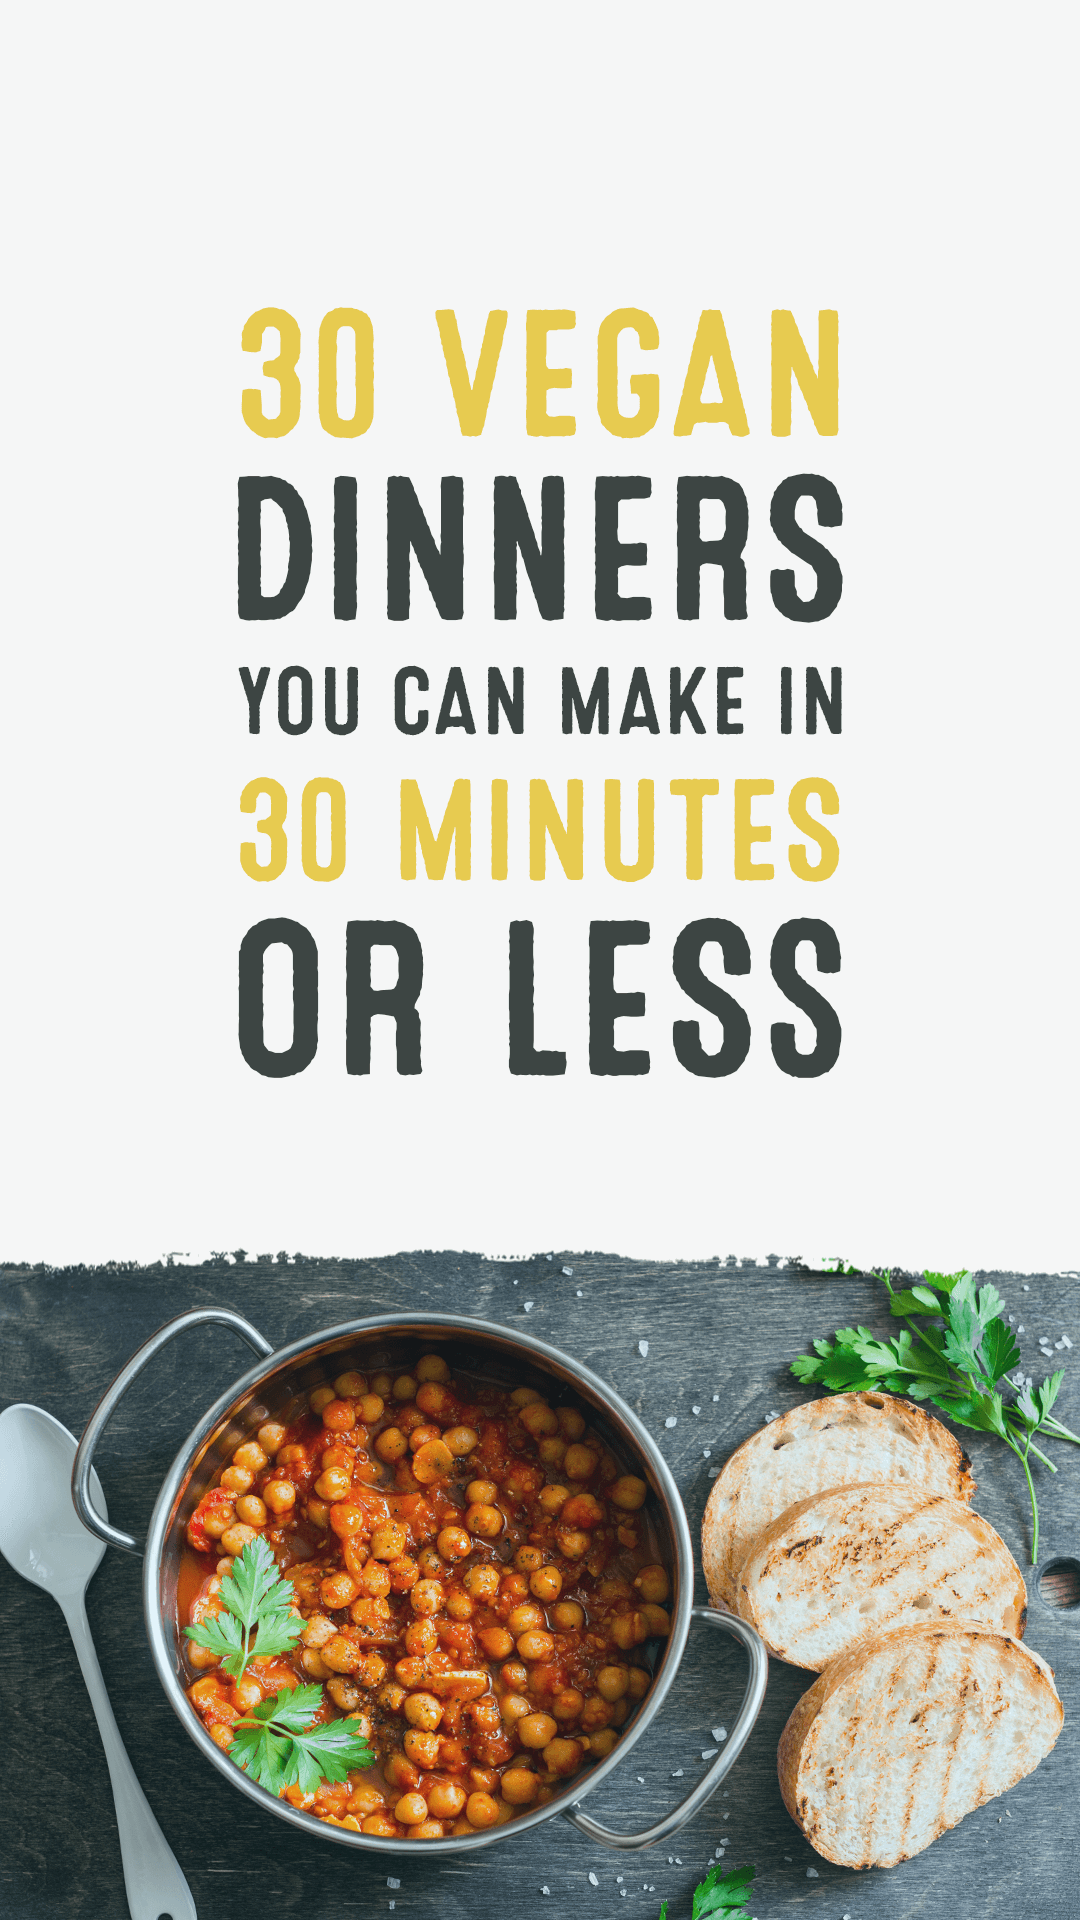 30 Vegan Dinners You Can Make in 30 Minutes or Less